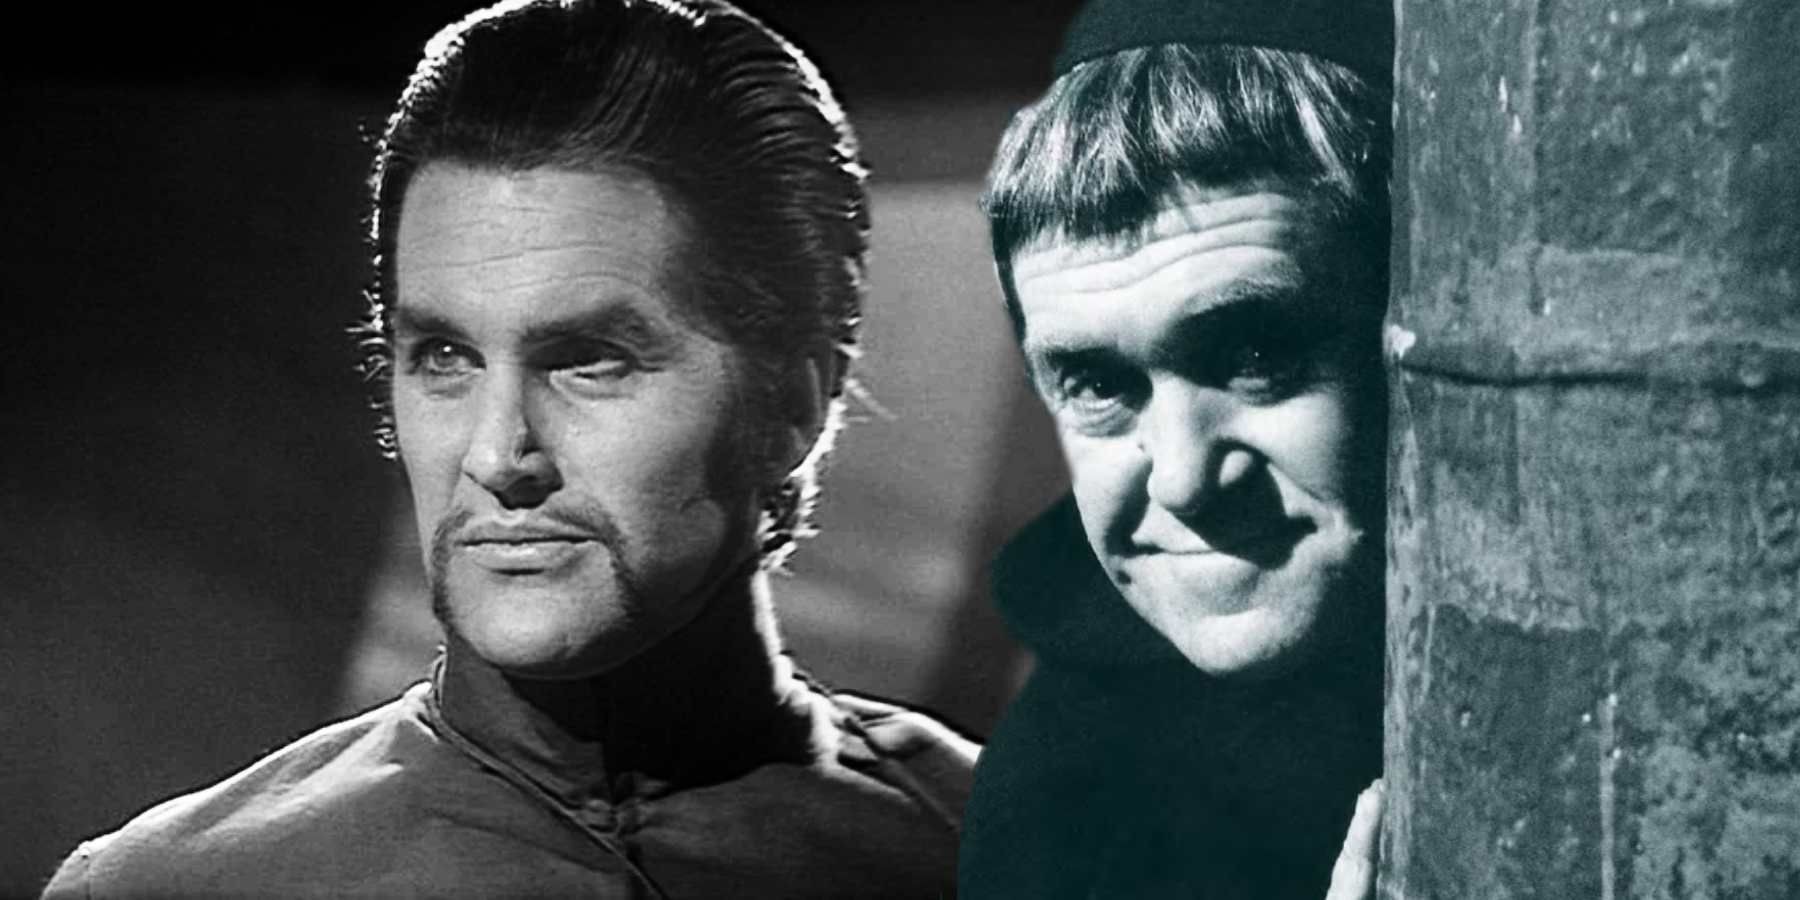 Edward Brayshaw as the War Chief and Peter Butterworth as the Meddling Monk in Doctor Who